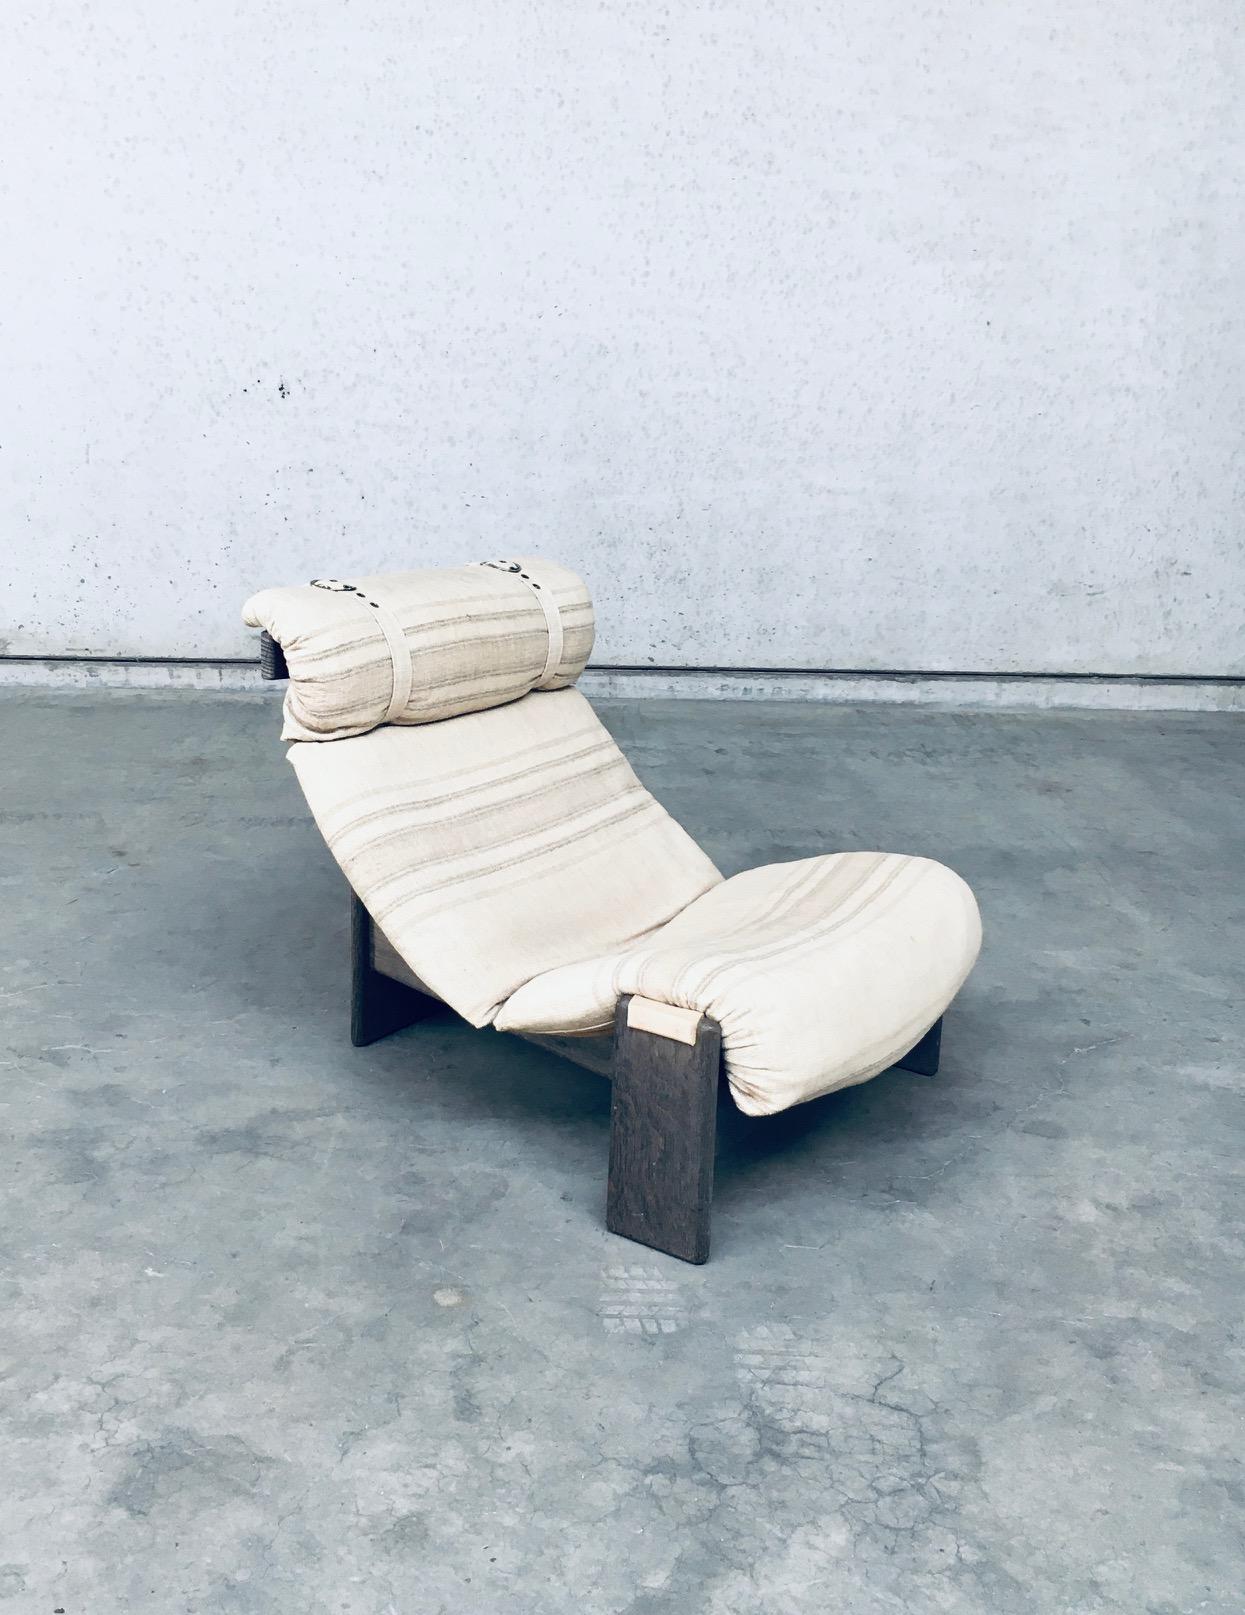 Vintage Midcentury Modern Belgian Design Tripod Sling Lounge Chair by Durlet. Made in Belgium, 1960's / 70's period. Rare lounge chair model. No designer markings found. A solid wood constructed base which has been made gray, grayish. A thick